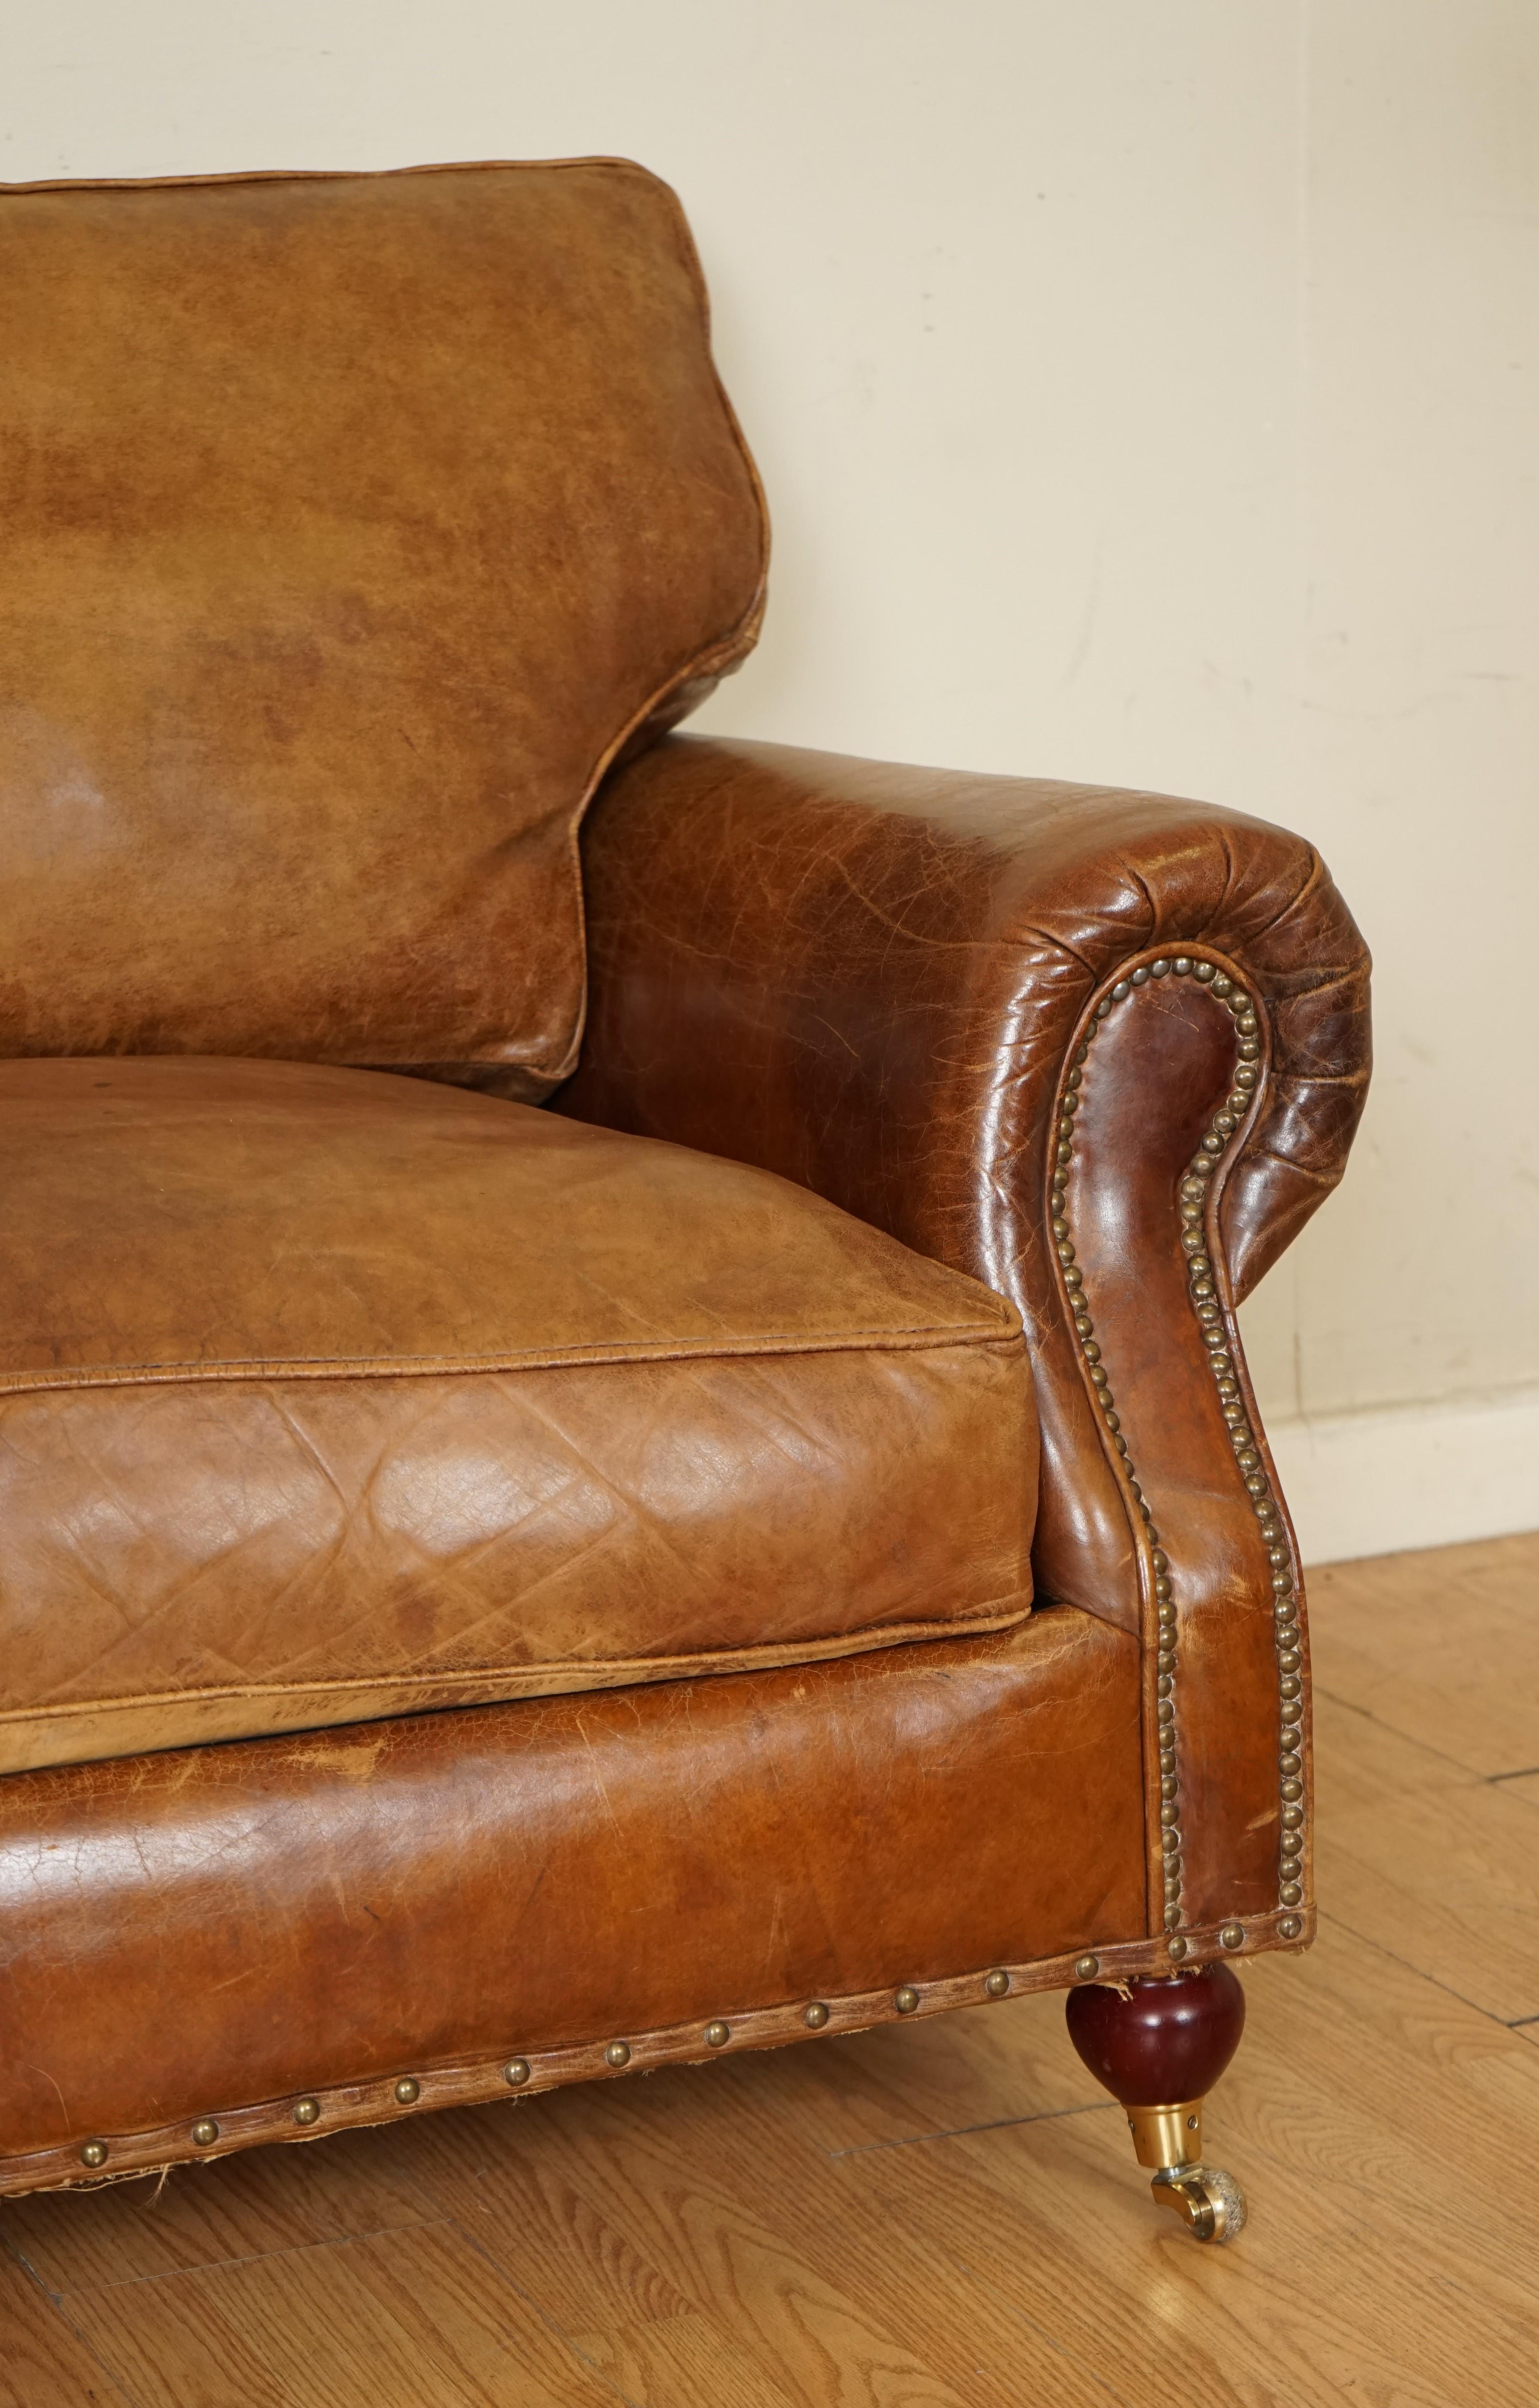 Hand-Crafted Feather Filled Halo Timothy Oulton Balmoral 3 Seater Heritage Brown Leather Sofa